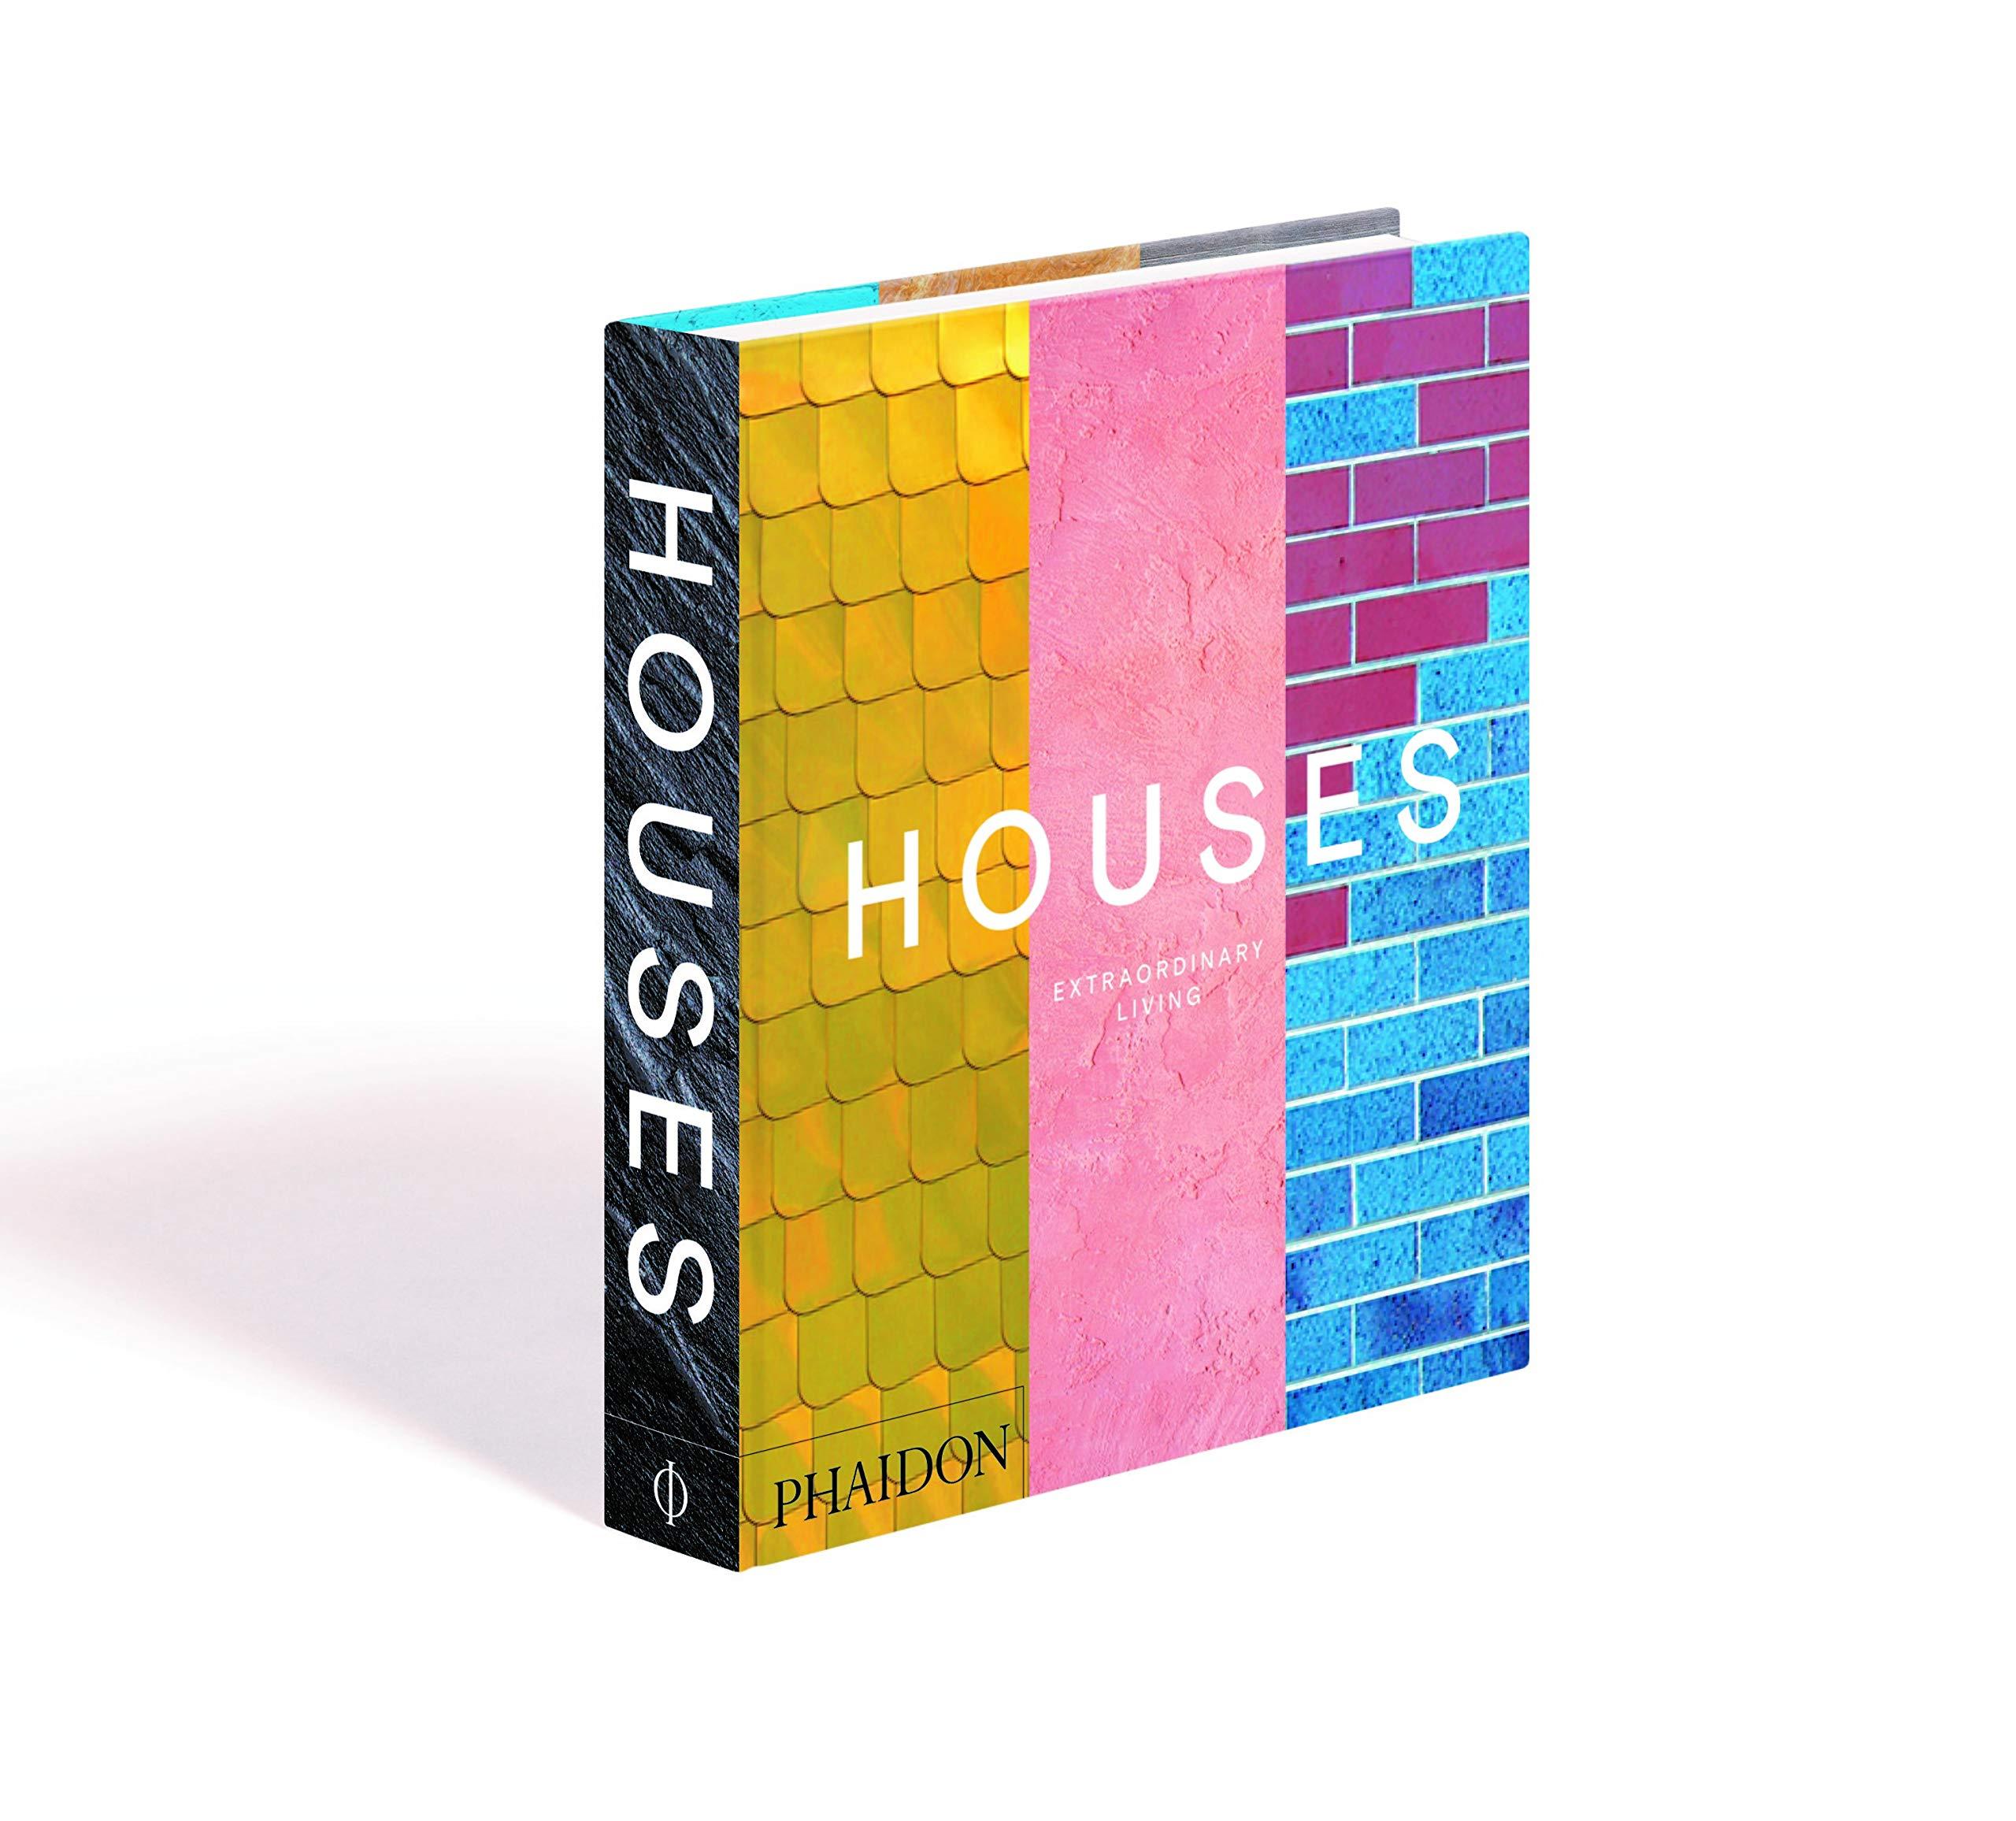 Modern in Stock in Los Angeles, Houses Extraordinary Living Phaidon Editors